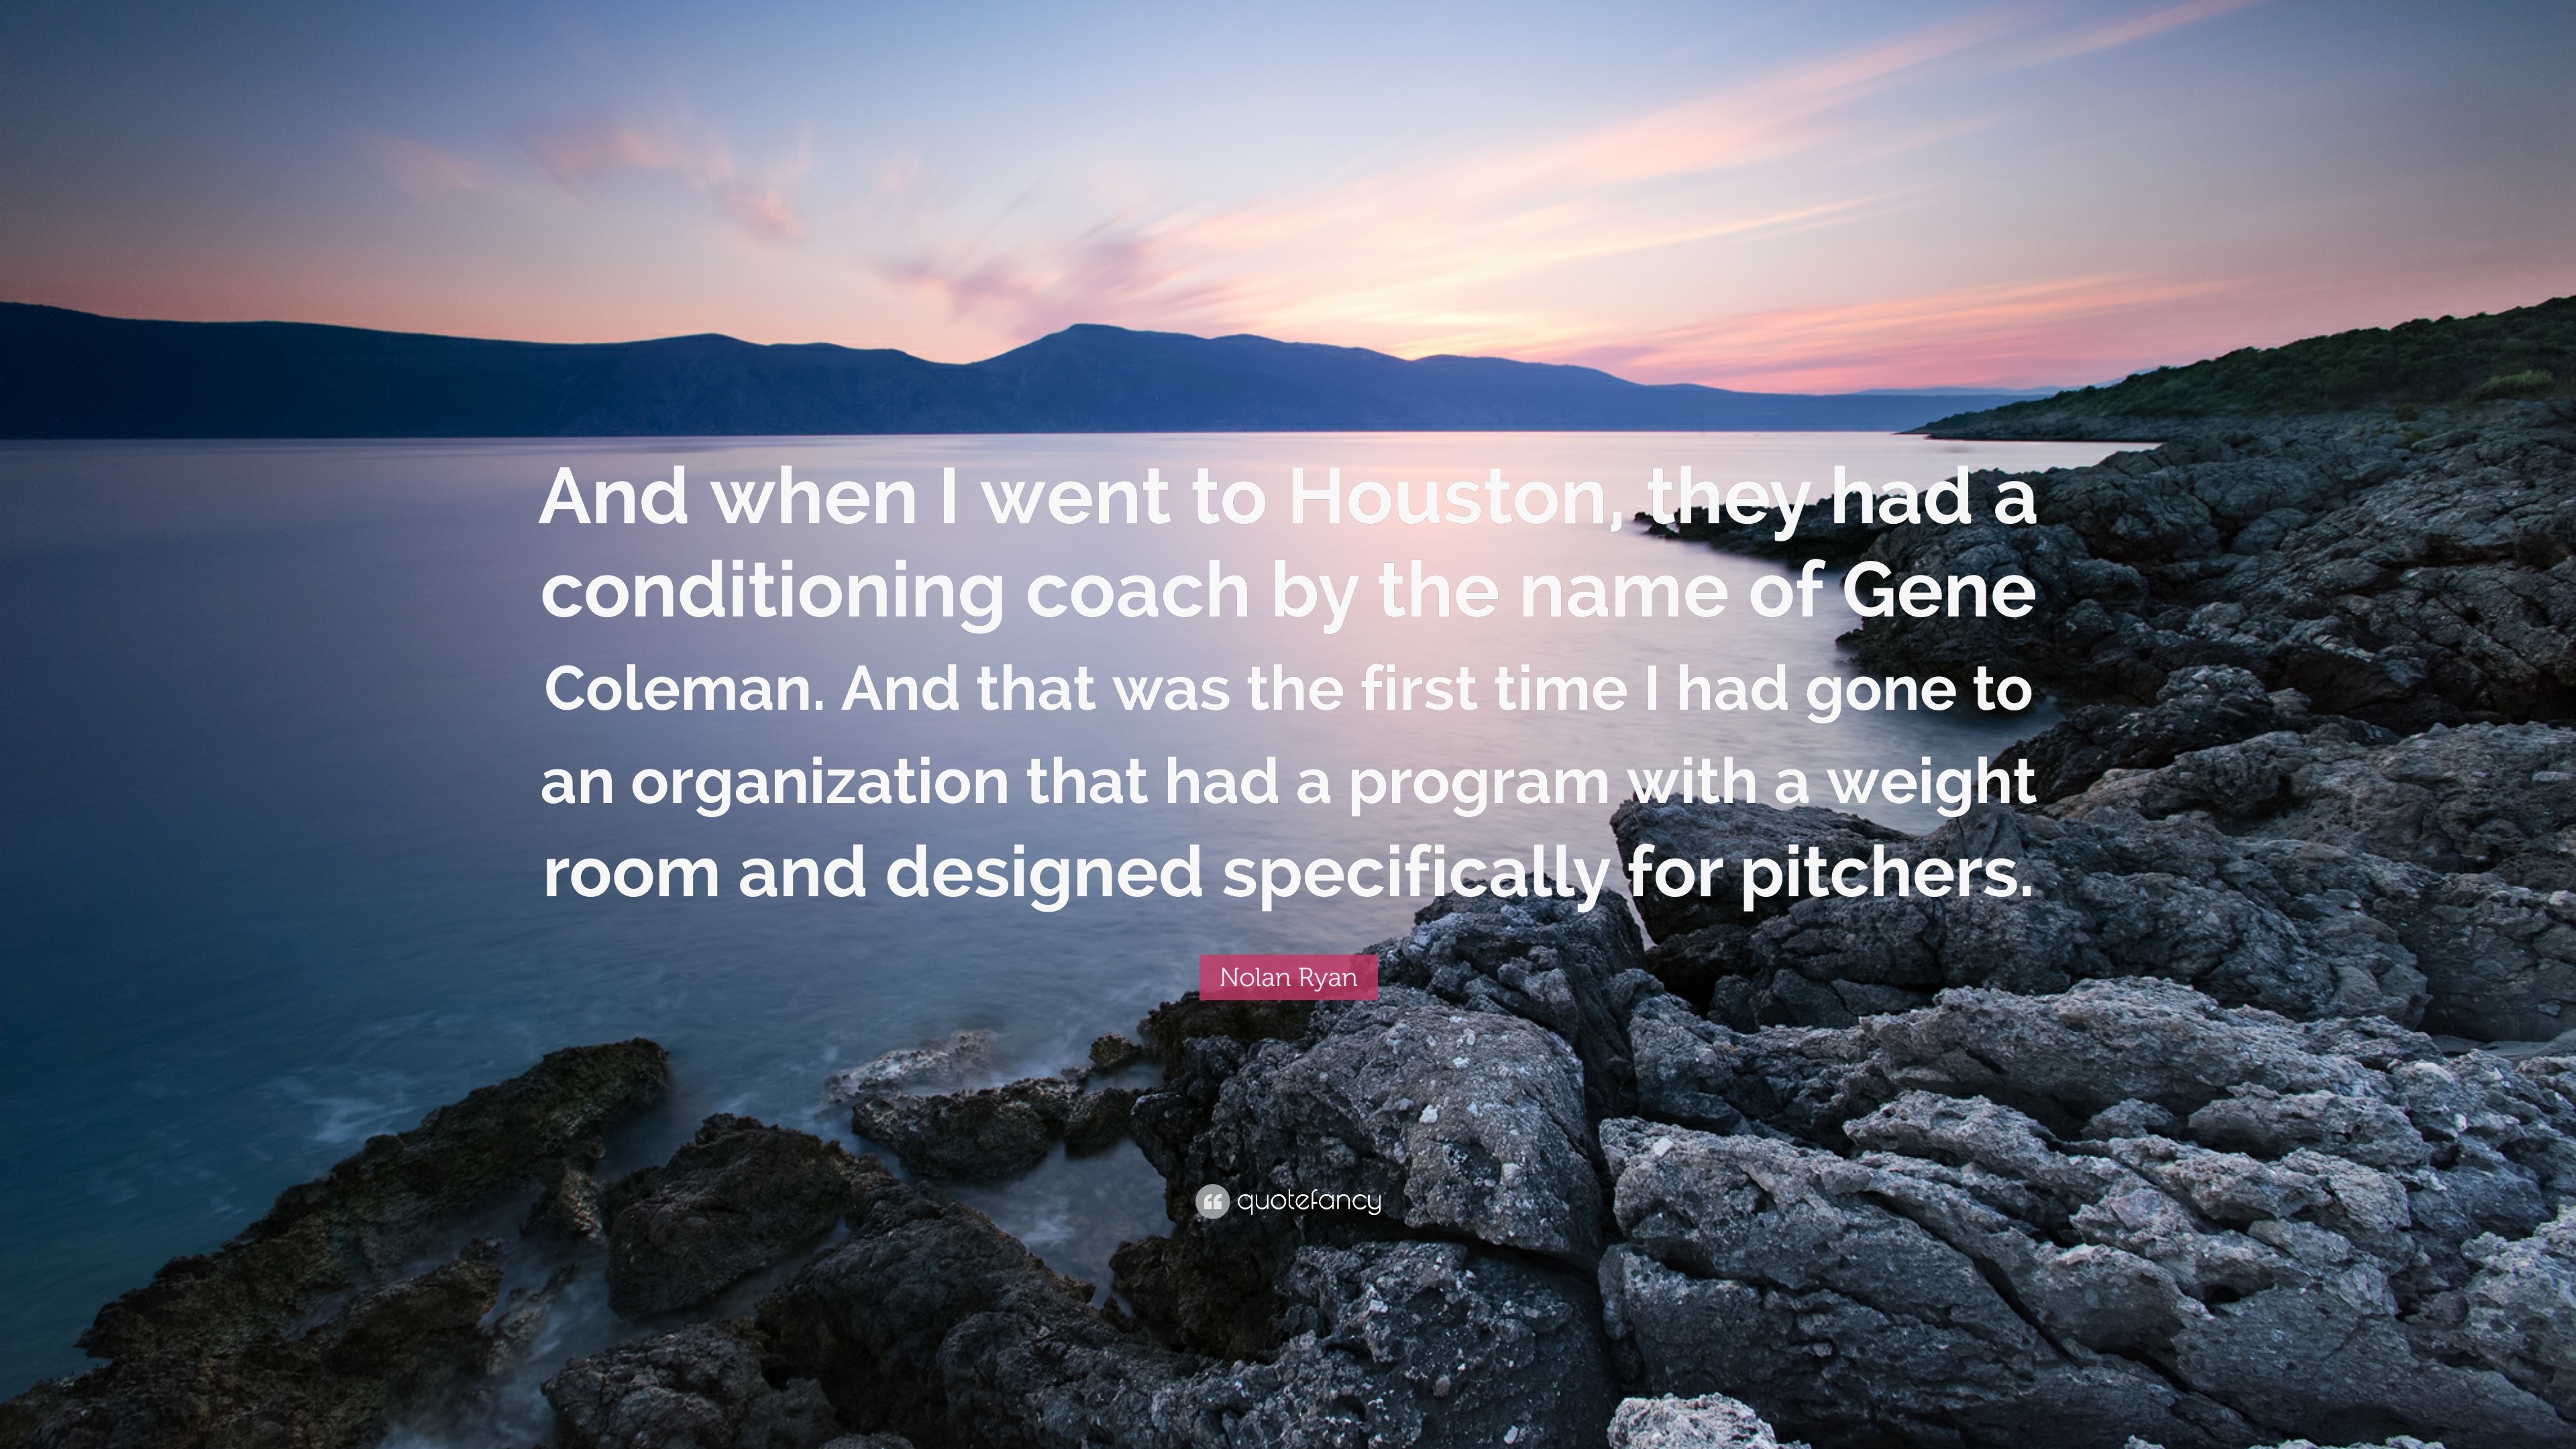 Nolan Ryan Quote: “And when I went to Houston, they had a conditioning  coach by the name of Gene Coleman. And that was the first time I had”